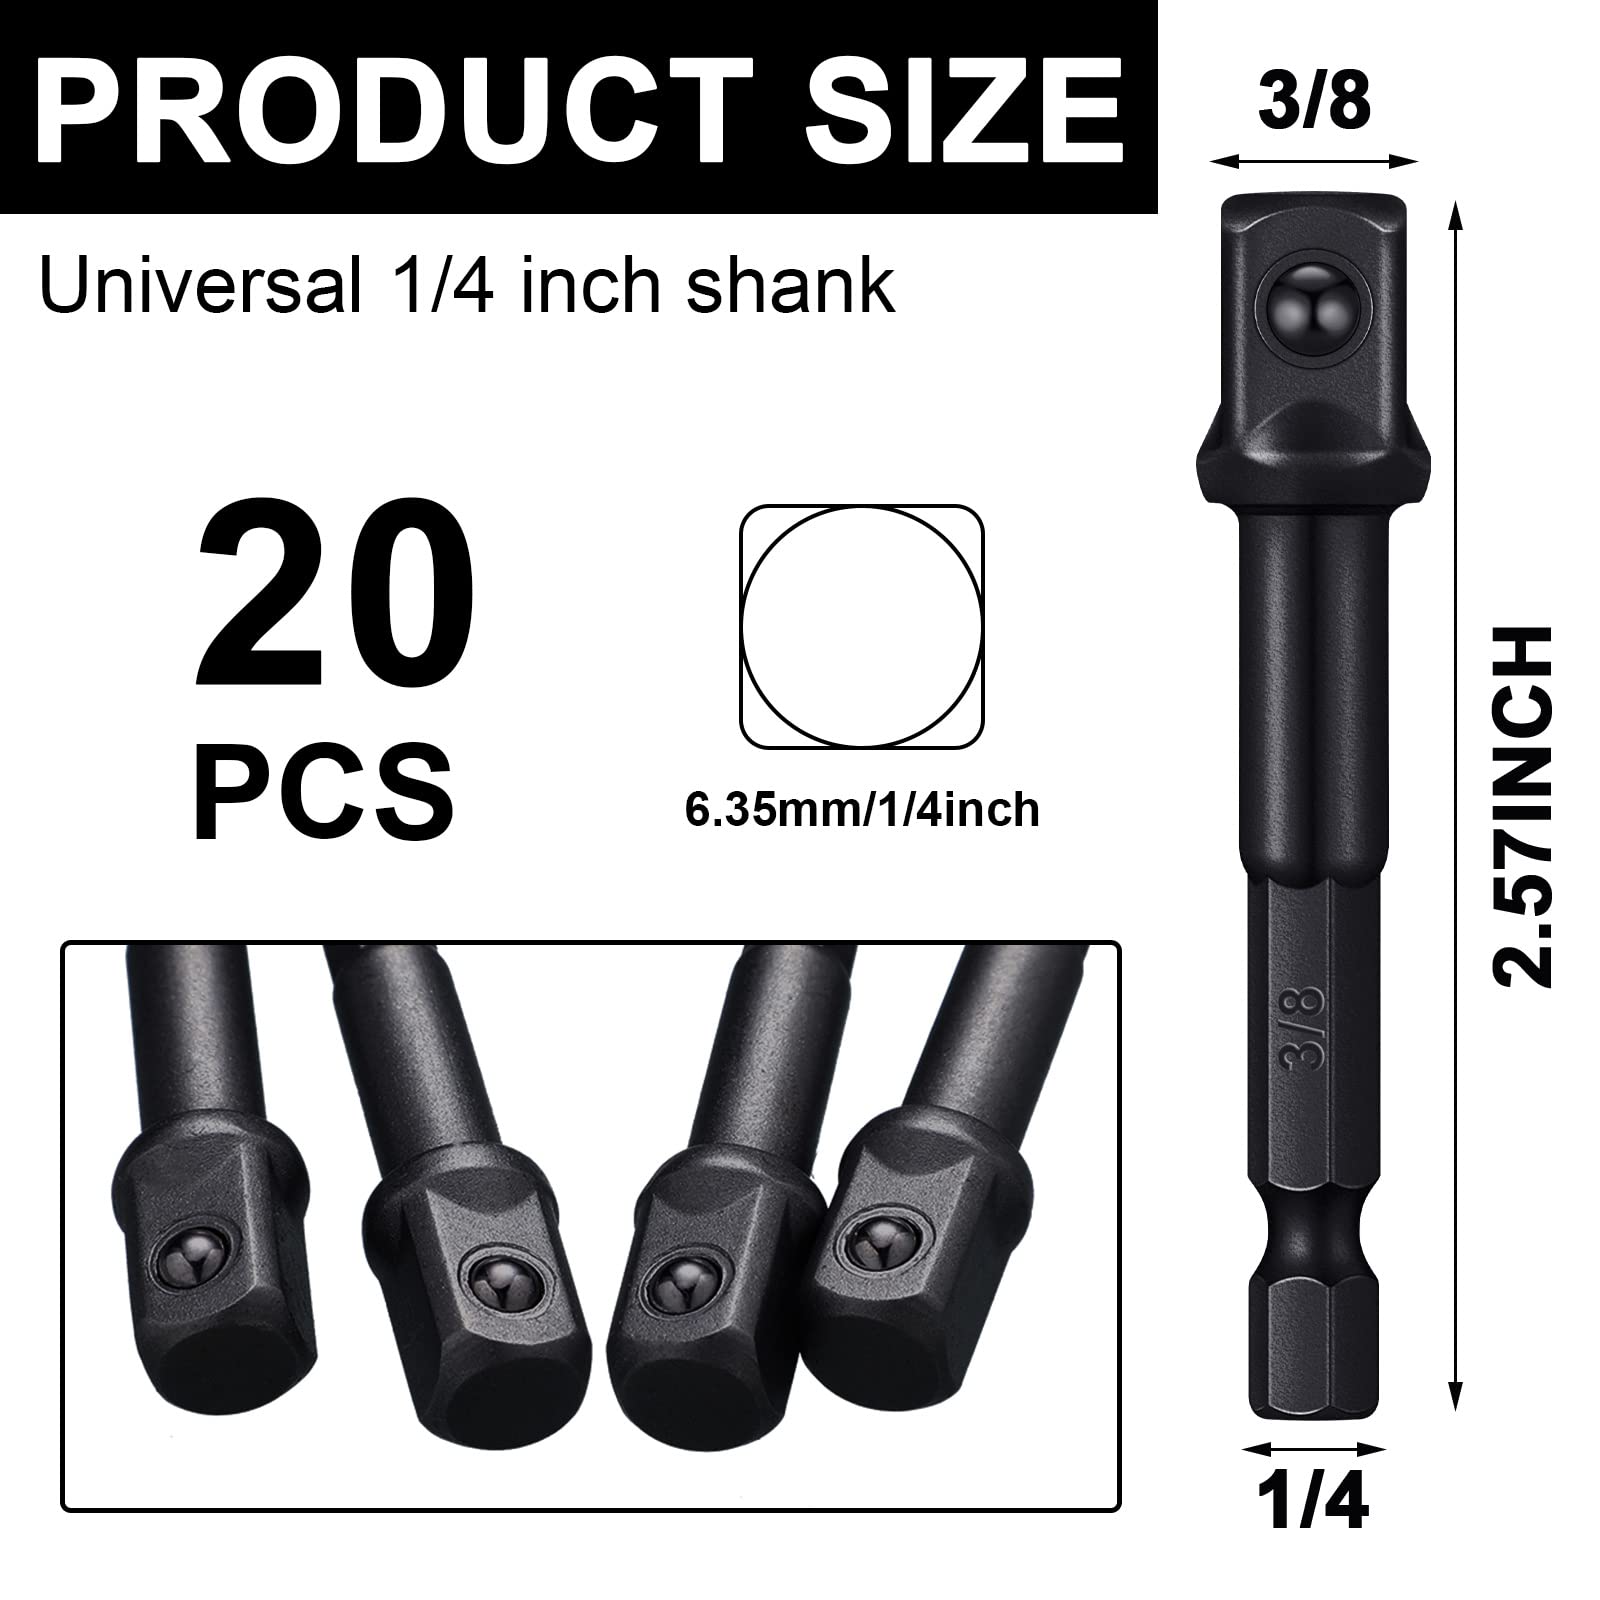 20 Pieces 3/8 inch Impact Adapter Square Socket Bit Adapter Hex Impact Socket for Drills Extension Socket Driver Bits Impact Socket Adapter for Automotive DIY-1/4 Hex Shank (Black)